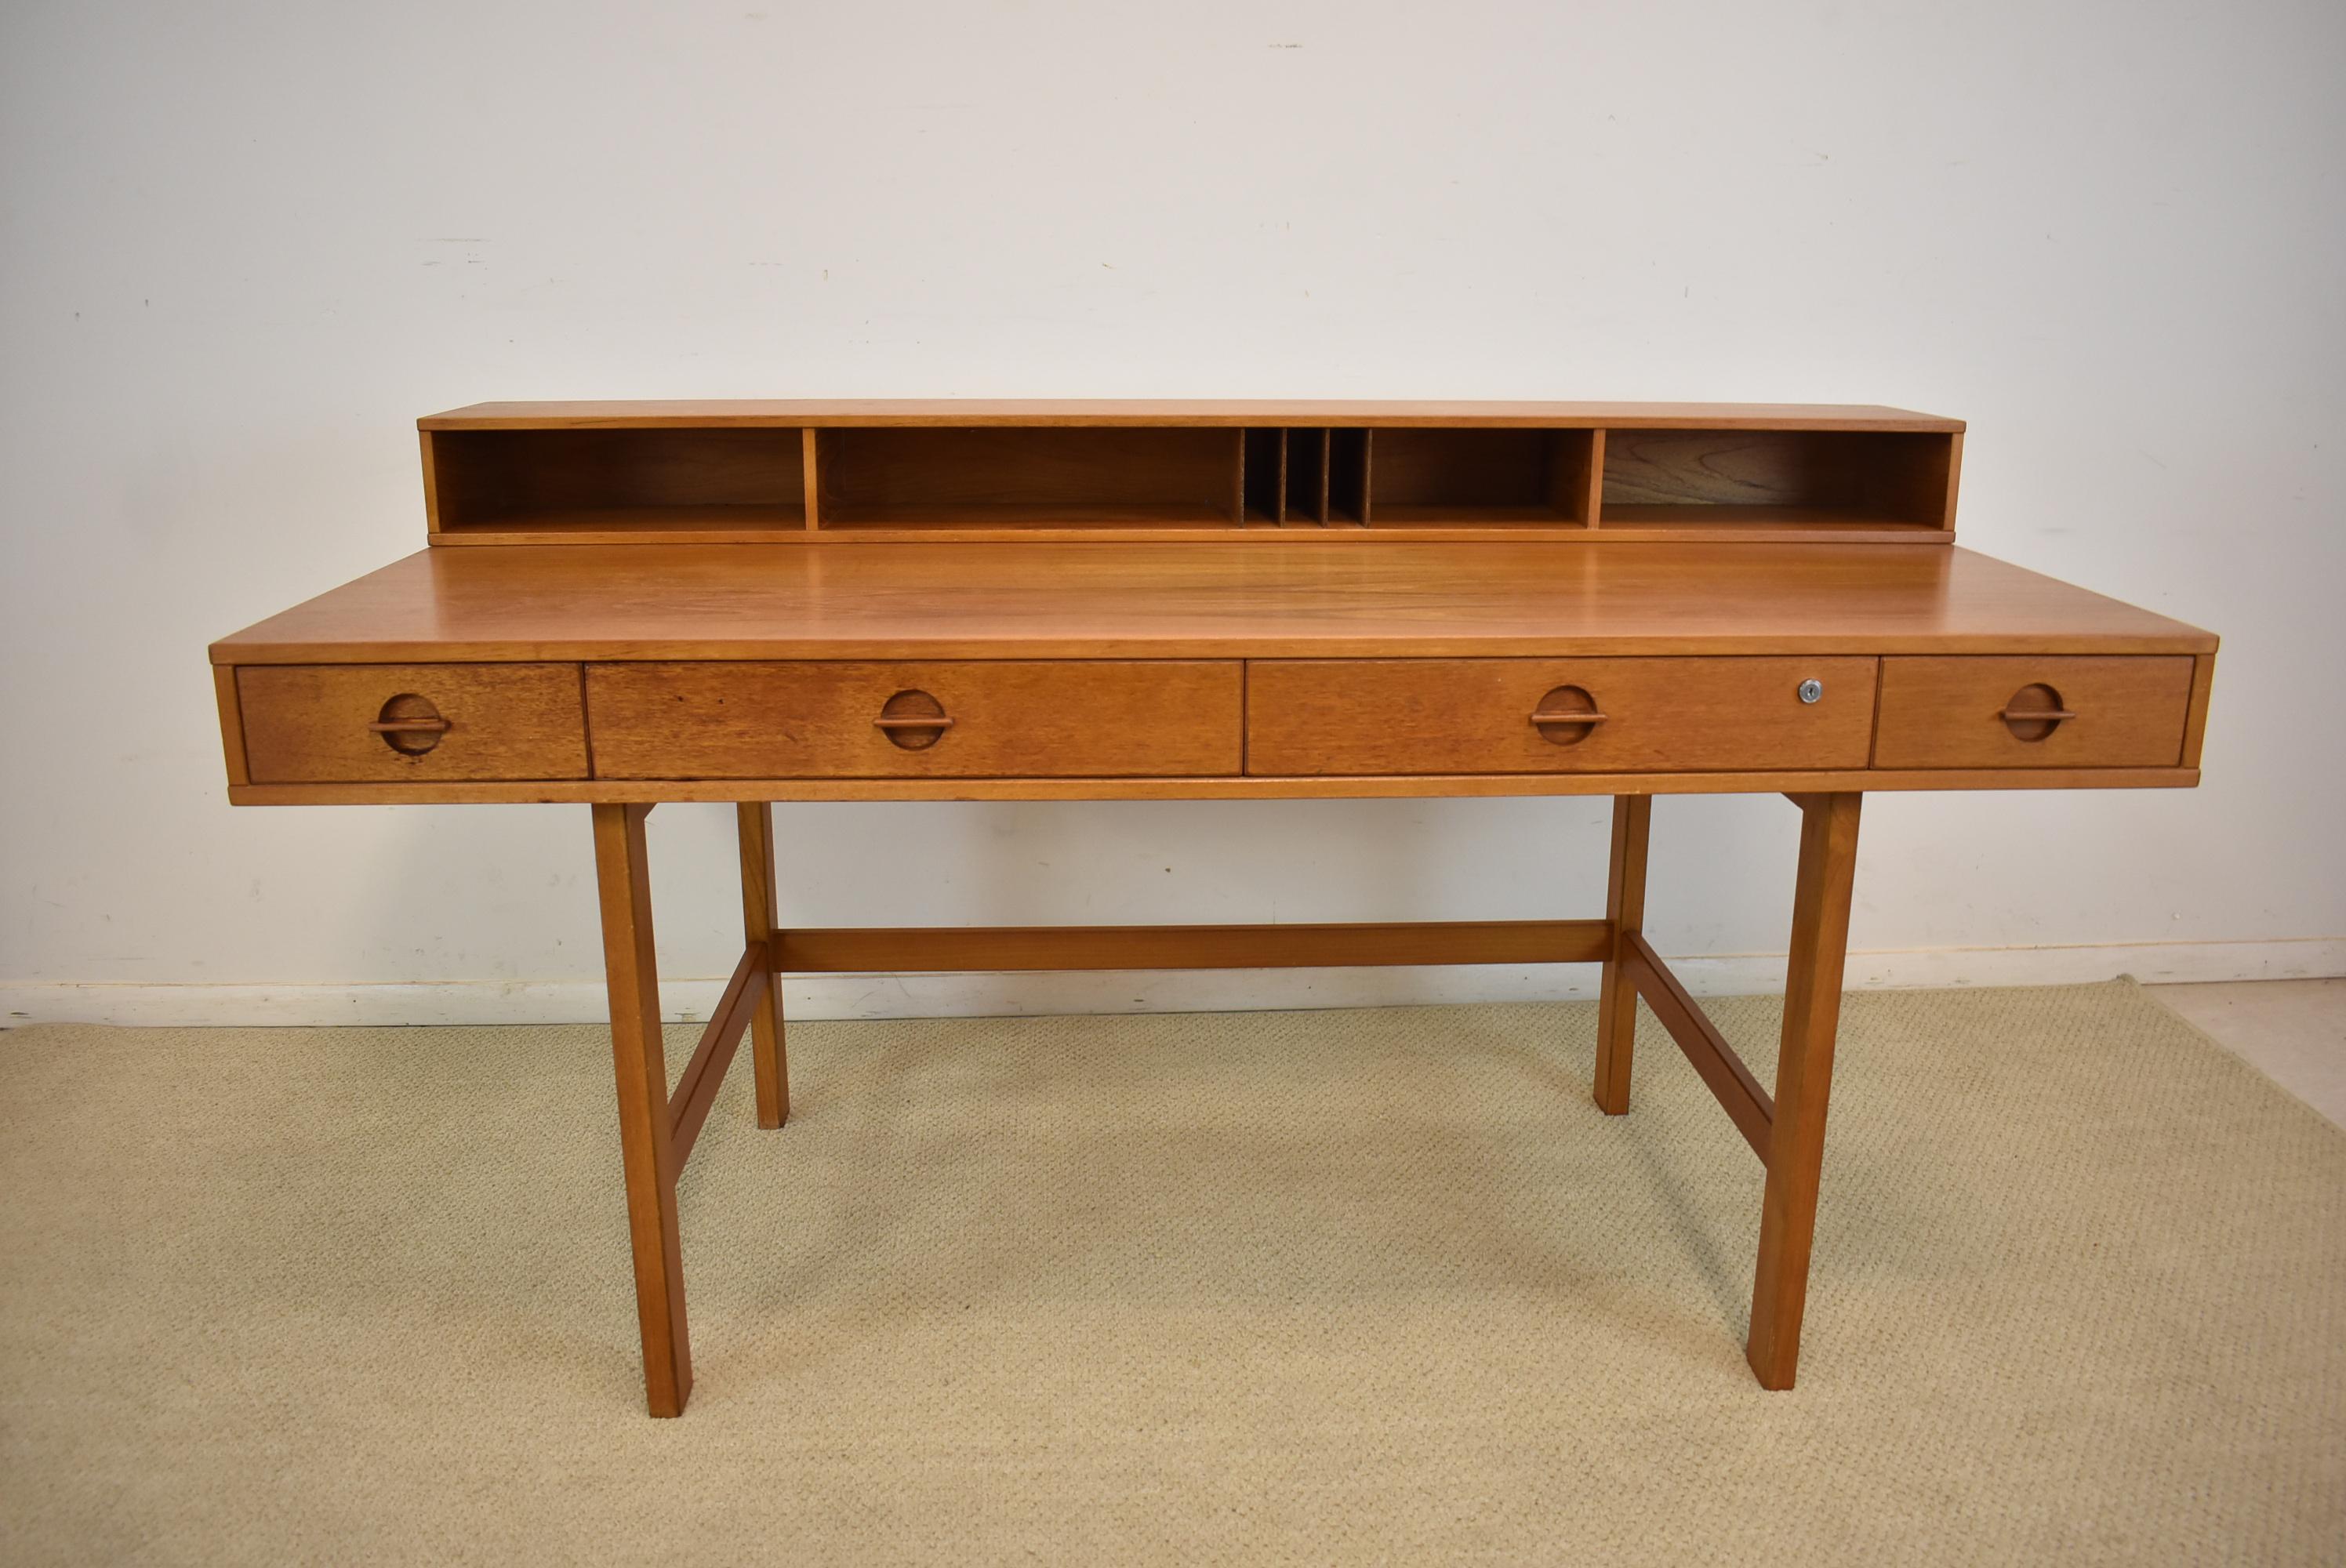 An incredible Danish modern teak partner's desk by Peter Løvig Nielsen. This desk has an amazing design. It features an upper cubical section that is hinged and can be flipped down to accommodate two people working at the desk in a partners fashion.